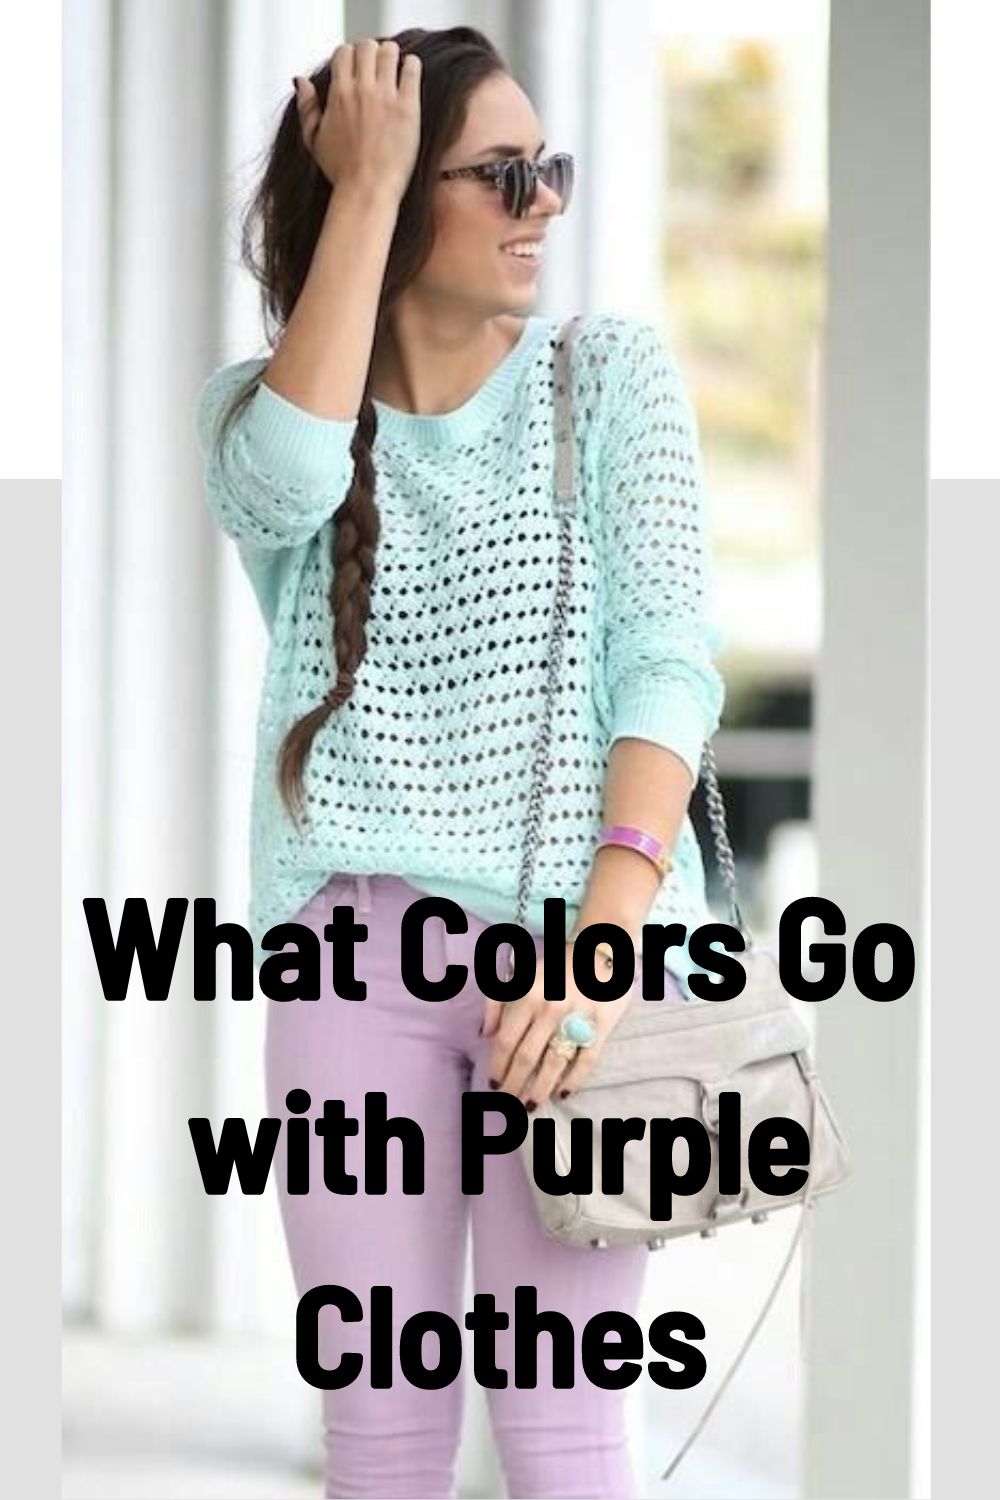 What Colors Go with Purple Clothes